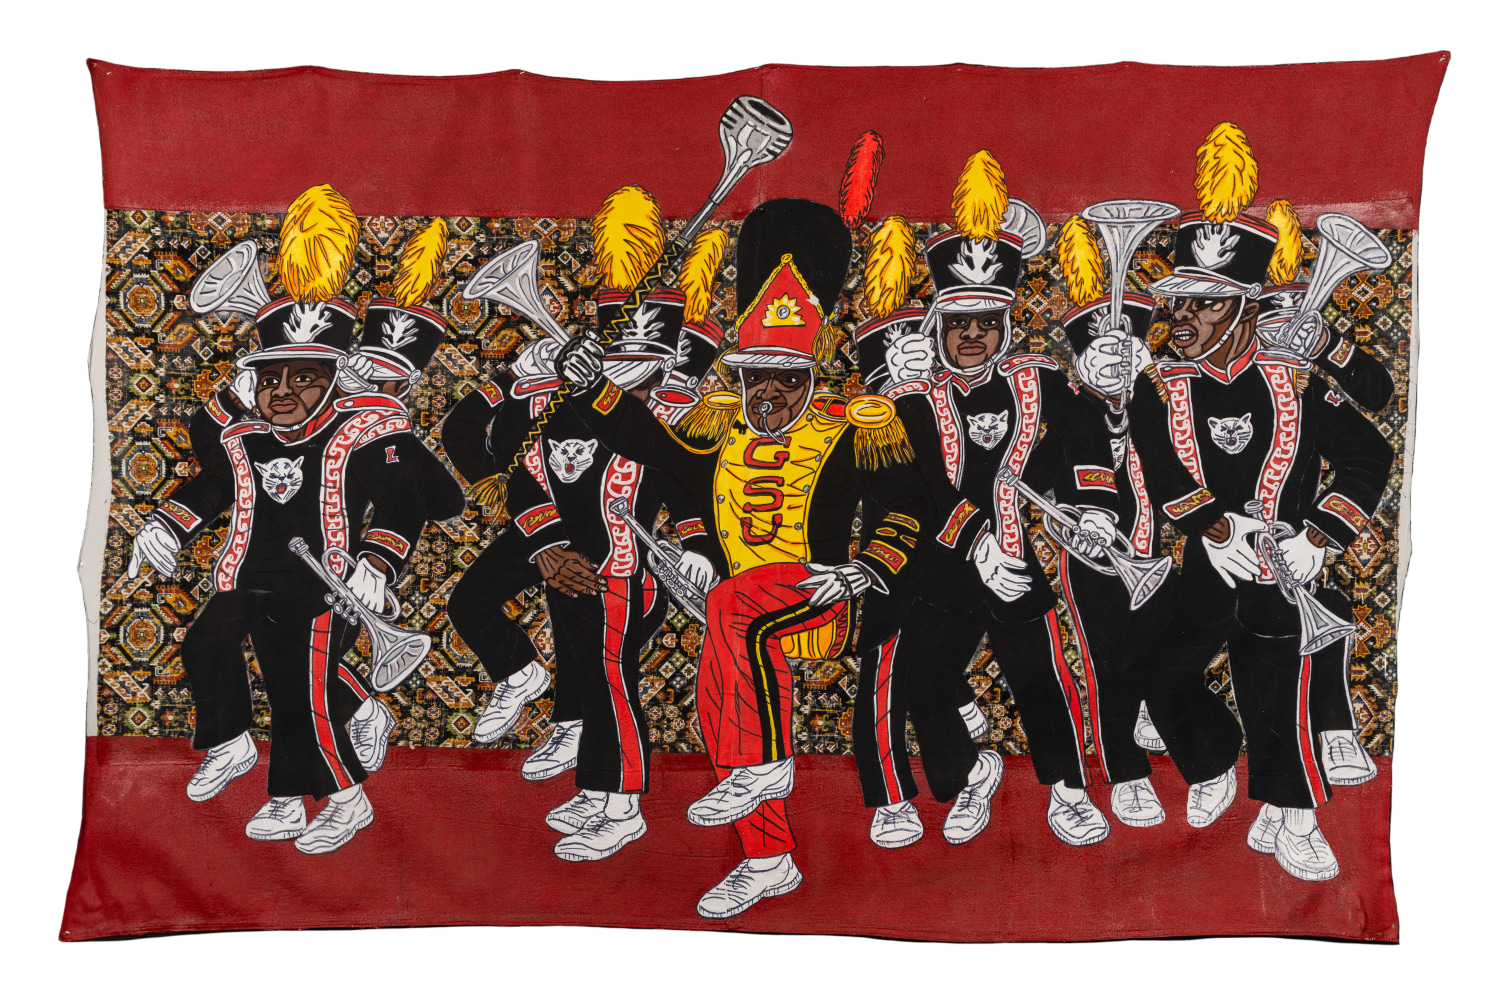 Keith Duncan
Grambling State University Marching Band, 2020
Acrylic with fabric on canvas
74 x 108 inches&amp;nbsp;